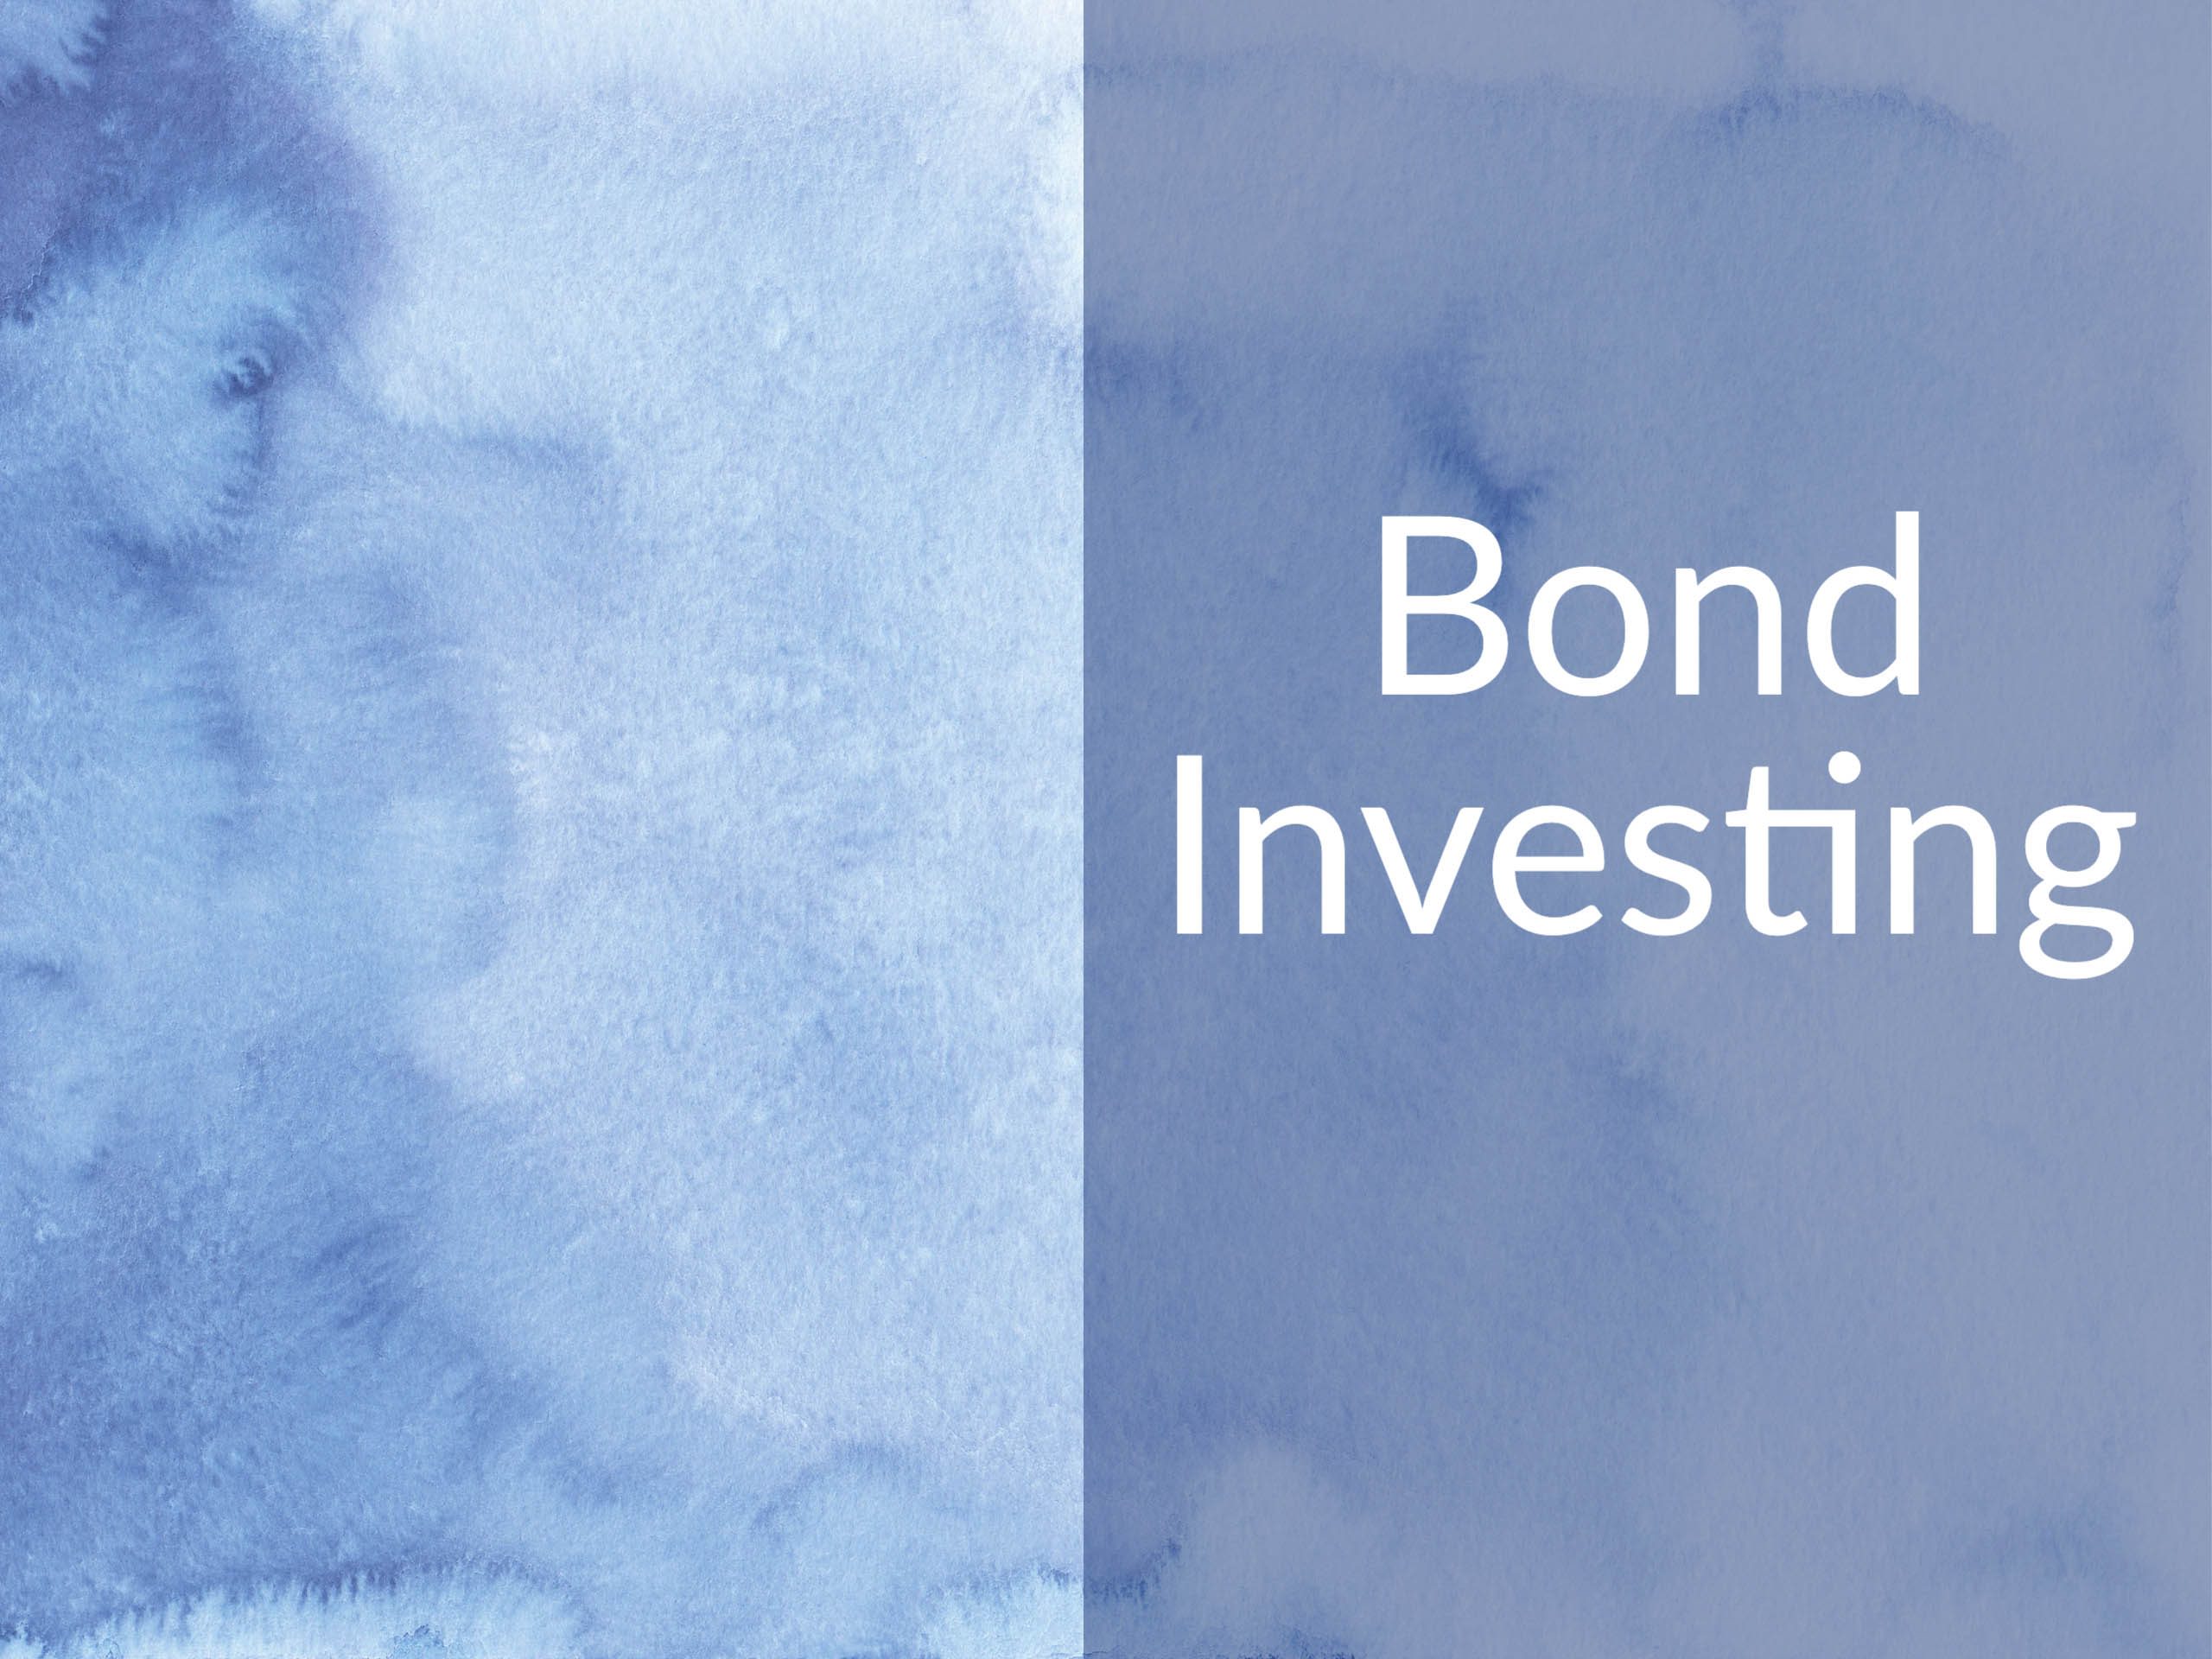 Blue watercolor paint on paper with caption "Bond Investing"